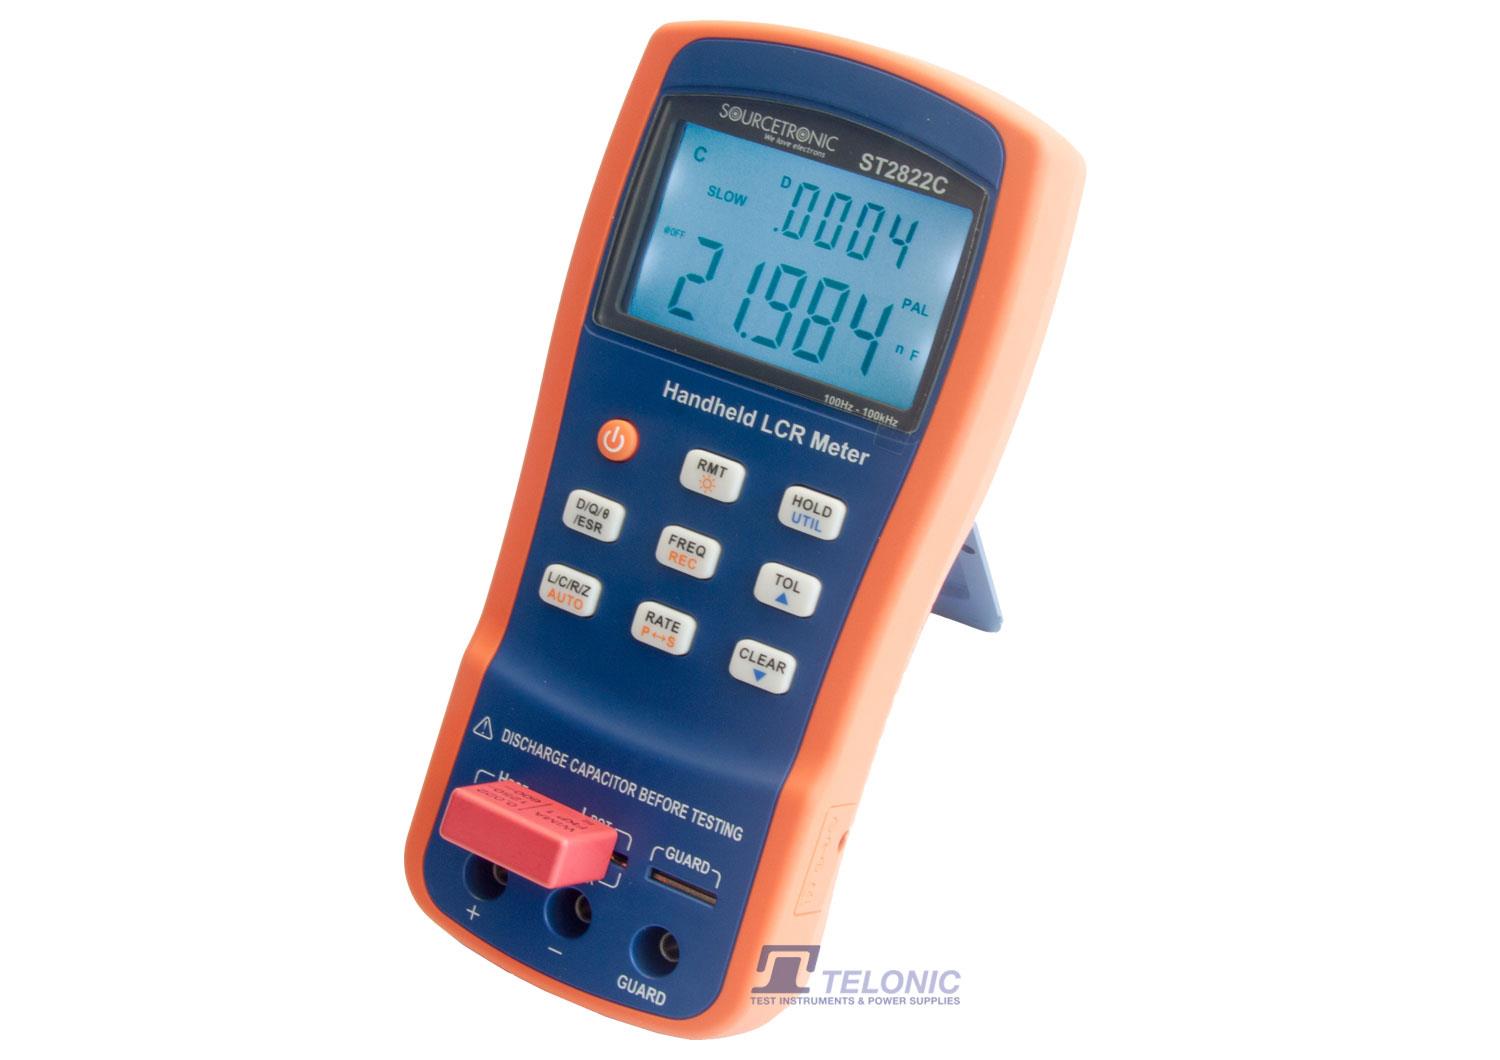 MICROTEST  Precision LCR Meter